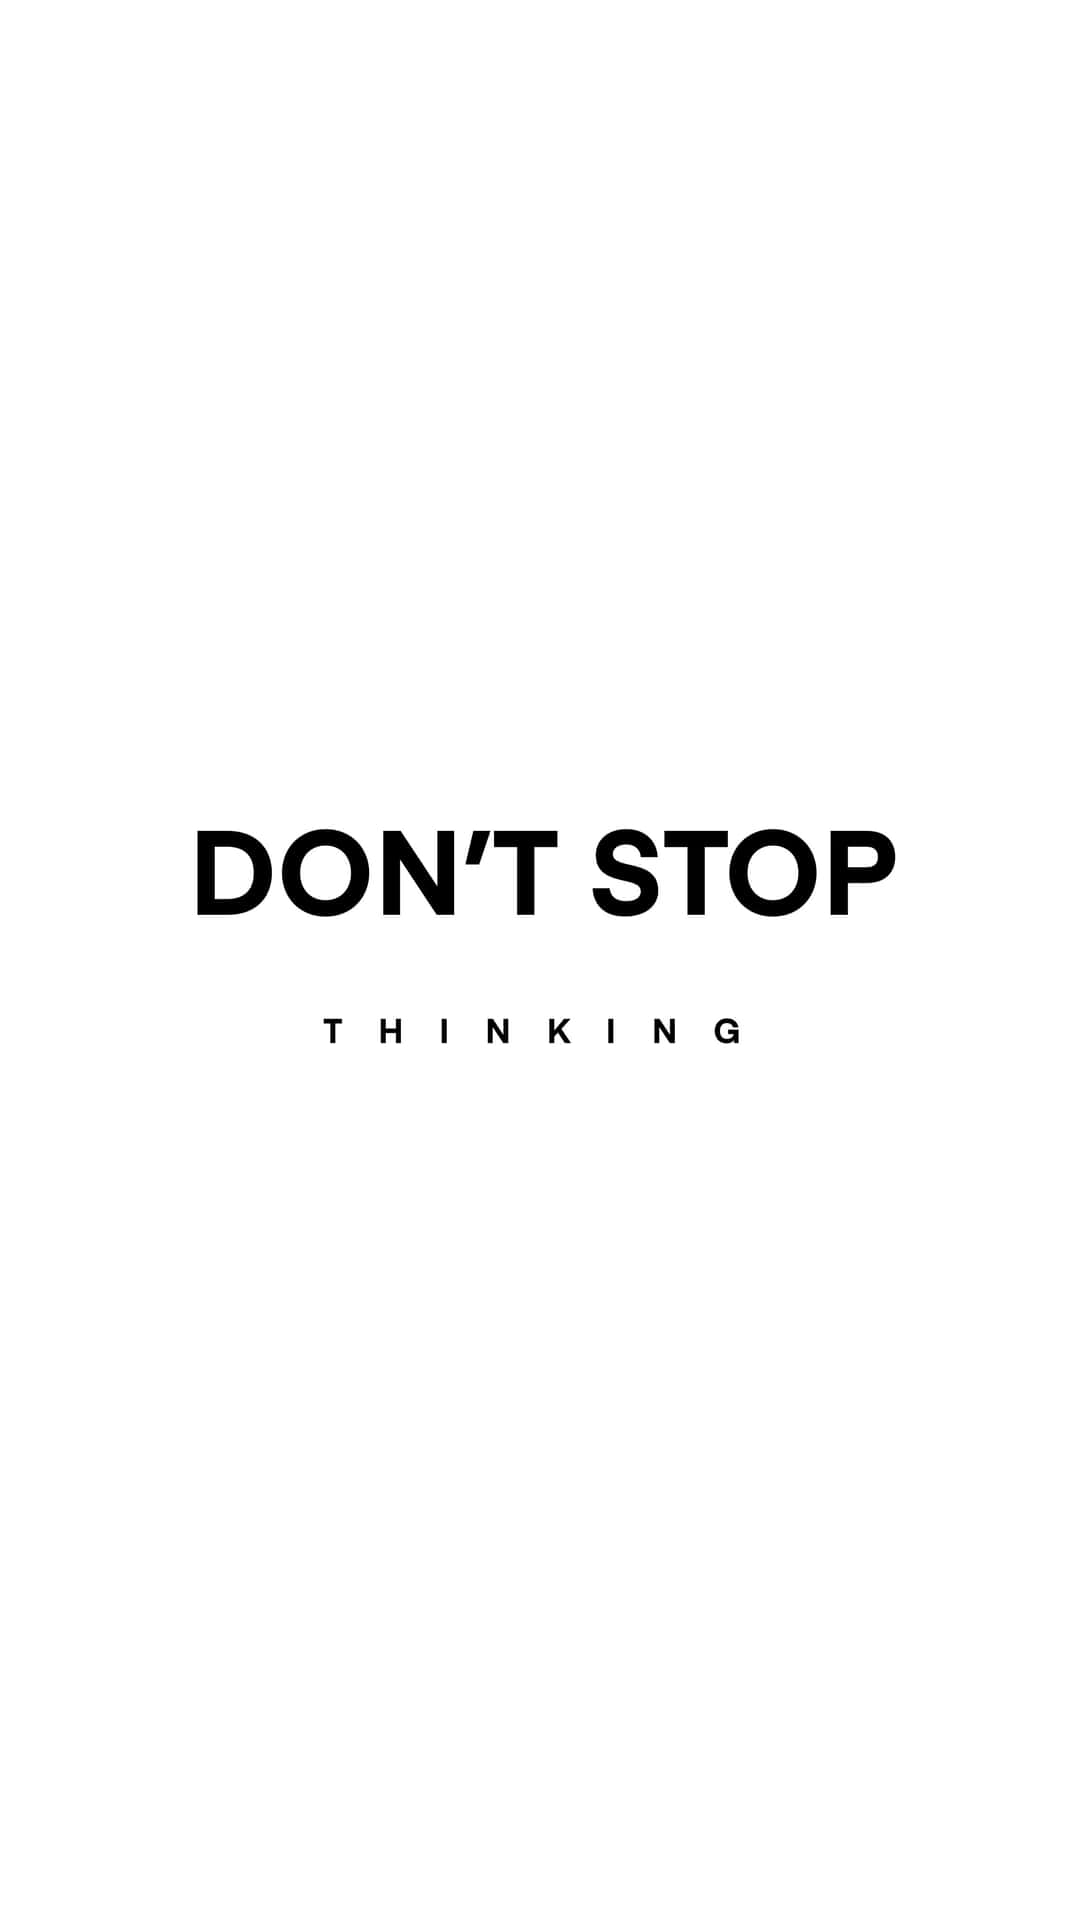 Don't Stop Thinking - T-shirt